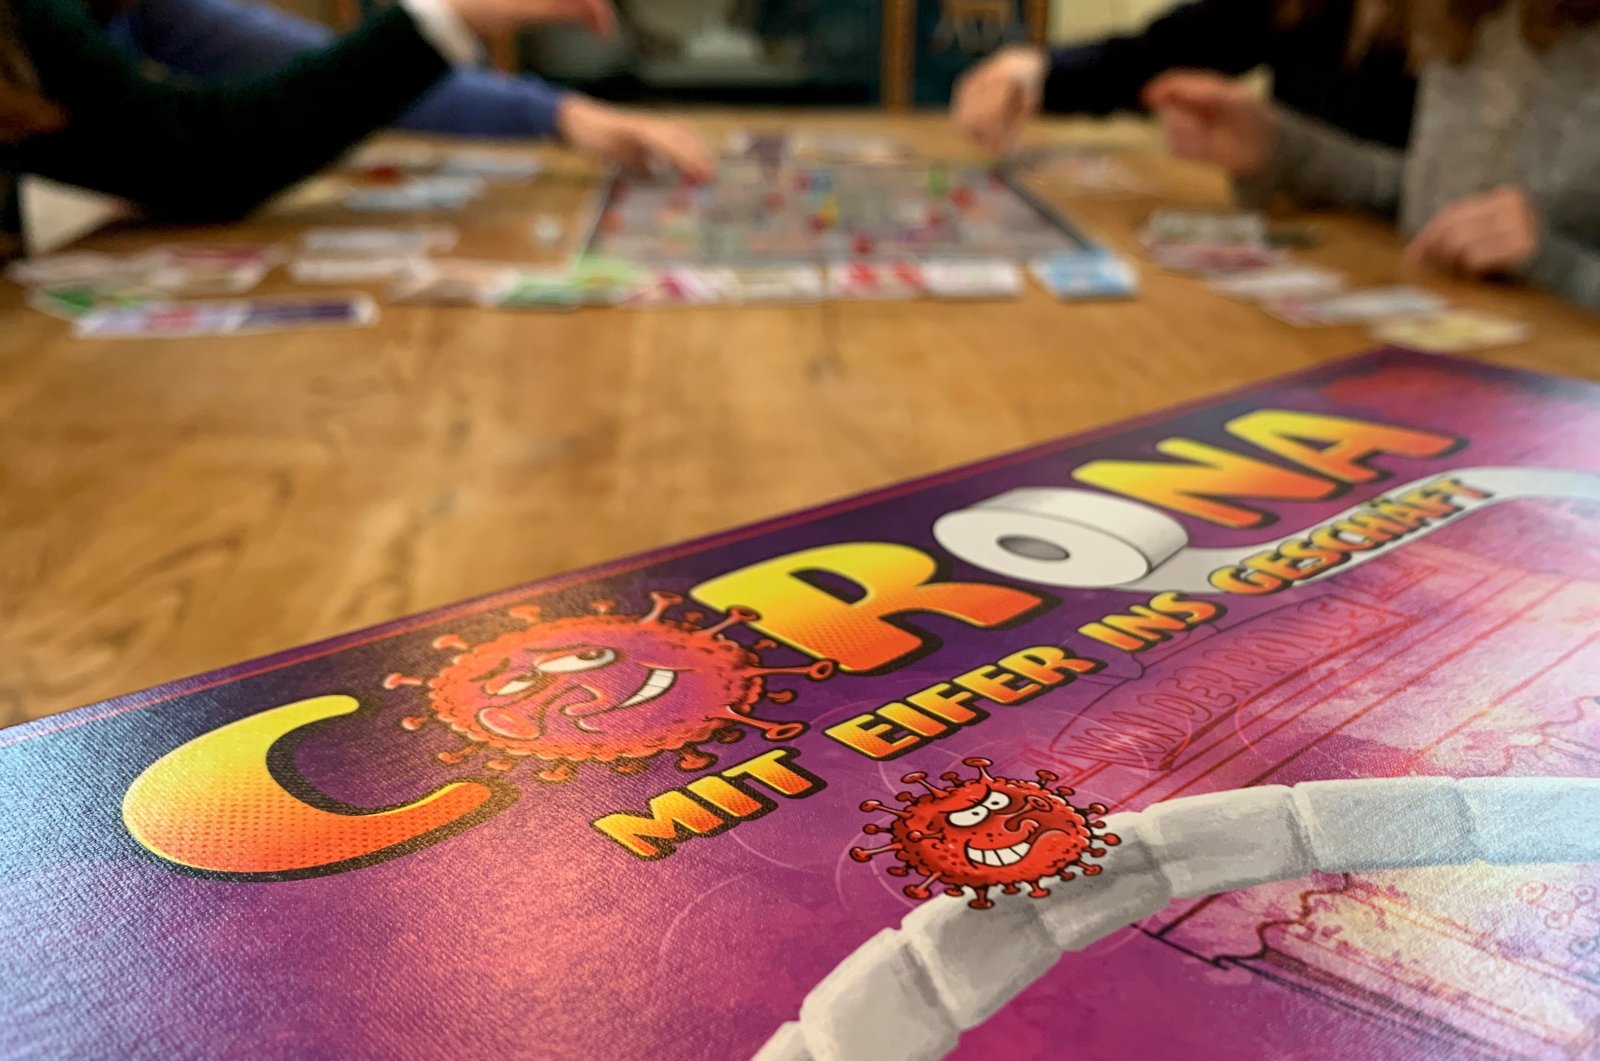 "Corona – the rush to the shops" board game invented by the Schwaderlapp sisters to pass the time in lockdown, in Wiesbaden Biebrich, Germany, Dec. 20, 2020. (REUTERS/Annkathrin Weiss)